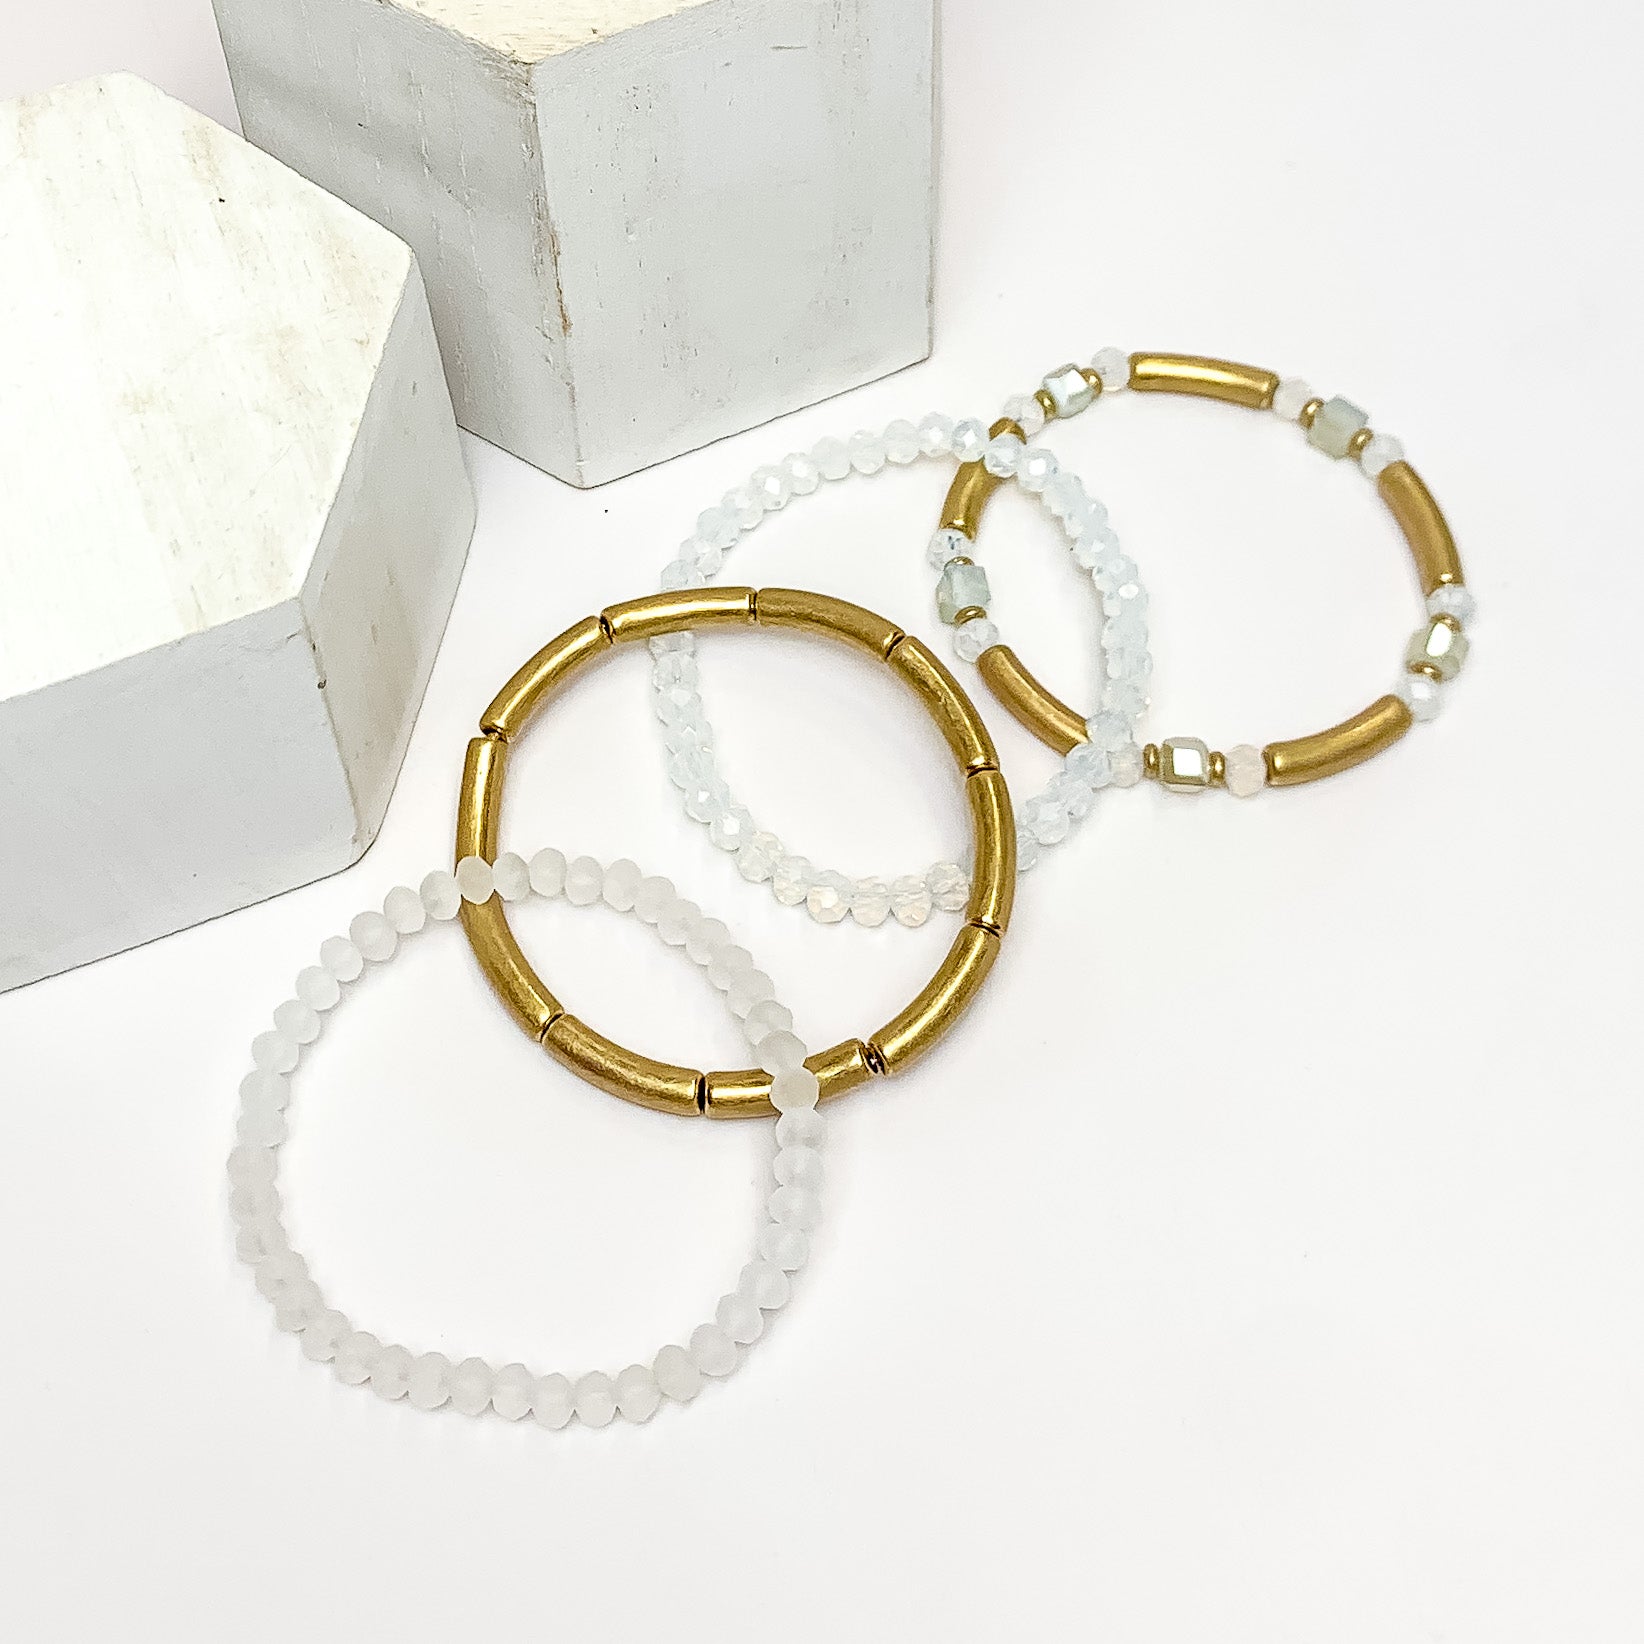 Set of Four | City Trip Beaded Bracelet Set in Gold Tone and White - Giddy Up Glamour Boutique